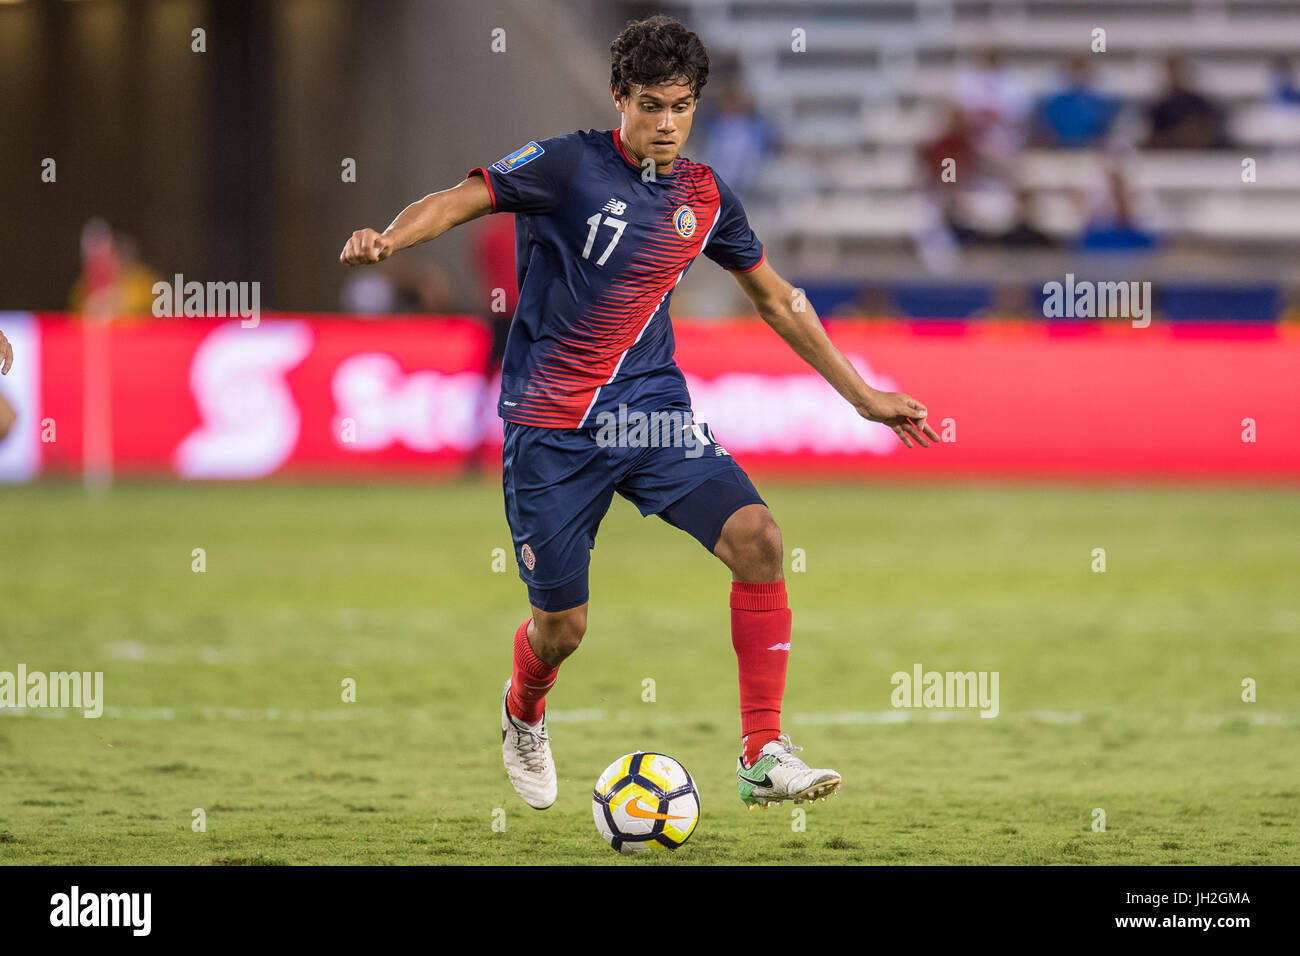 Houston, Texas, USA. 11th July, 2017. Costa Rica midfielder Yeltsin Tejeda (17) controls the ball during the 2nd half of an international CONCACAF Gold Cup soccer match between Canada and Costa Rica at BBVA Compass Stadium in Houston, TX on July 11th, 2017. The game ended in a 1-1 draw. Credit: Trask Smith/ZUMA Wire/Alamy Live News Stock Photo